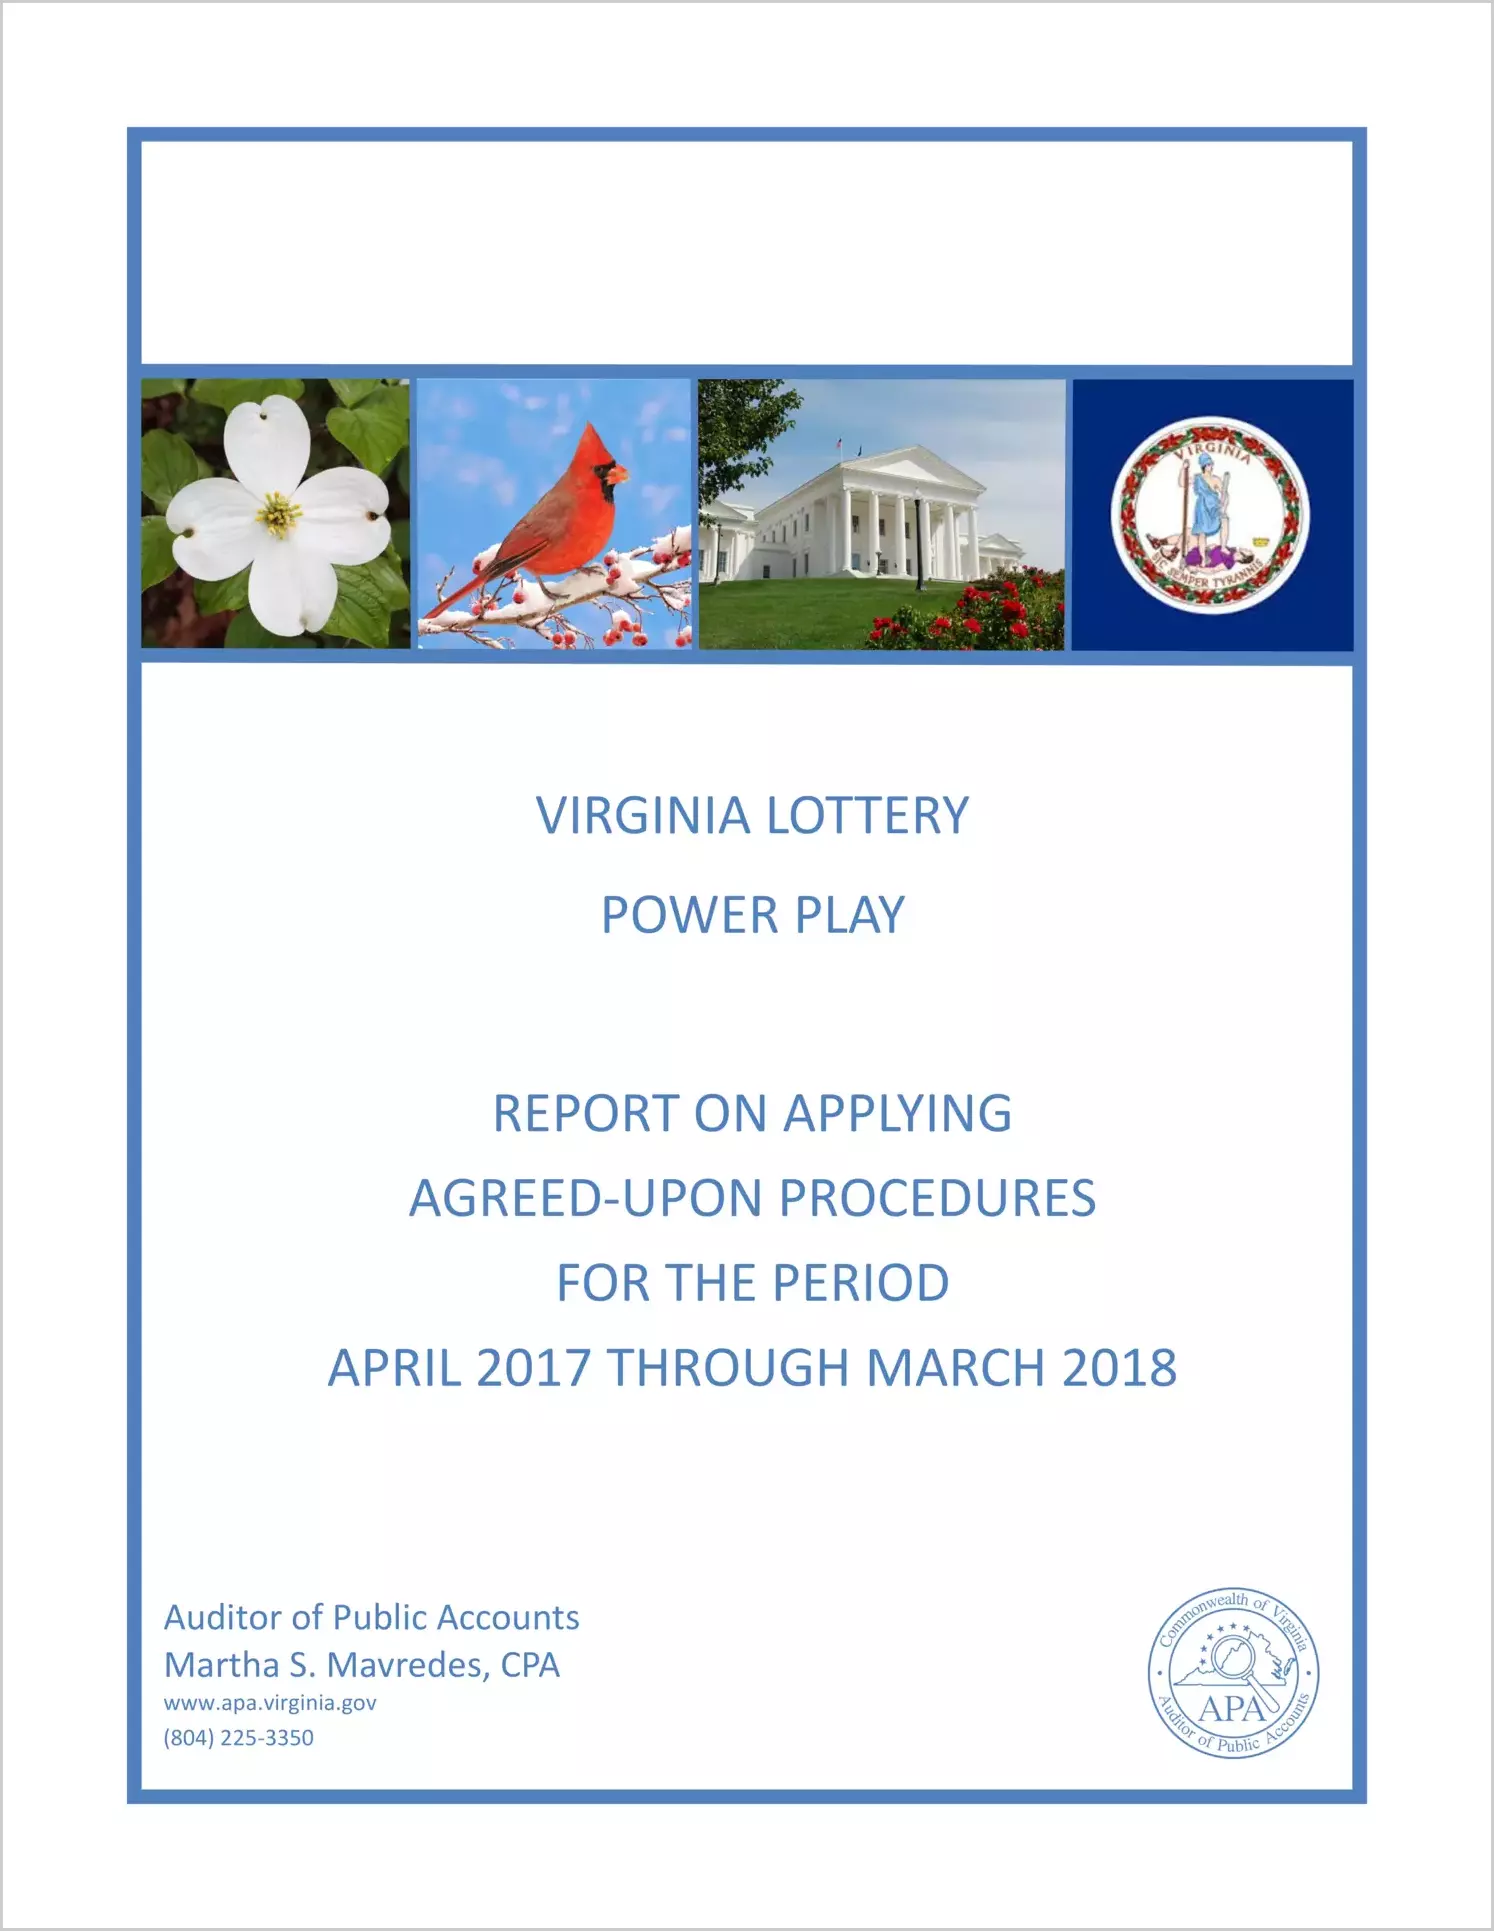 VA Lottery Power Play report on Applying Agreed-Upon Procedures for the period April 2017 through March 2018